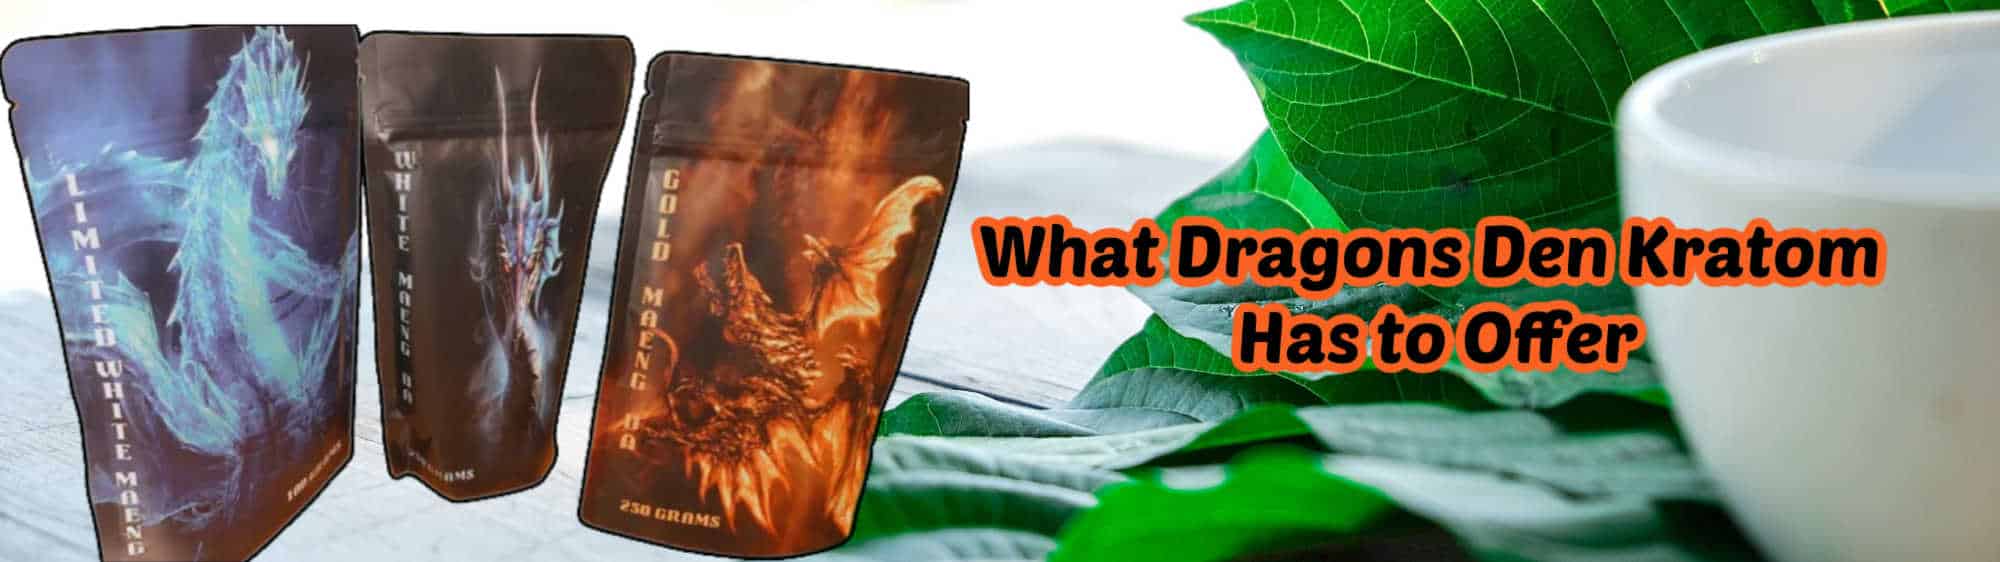 image of what dragons den kratom has to offer